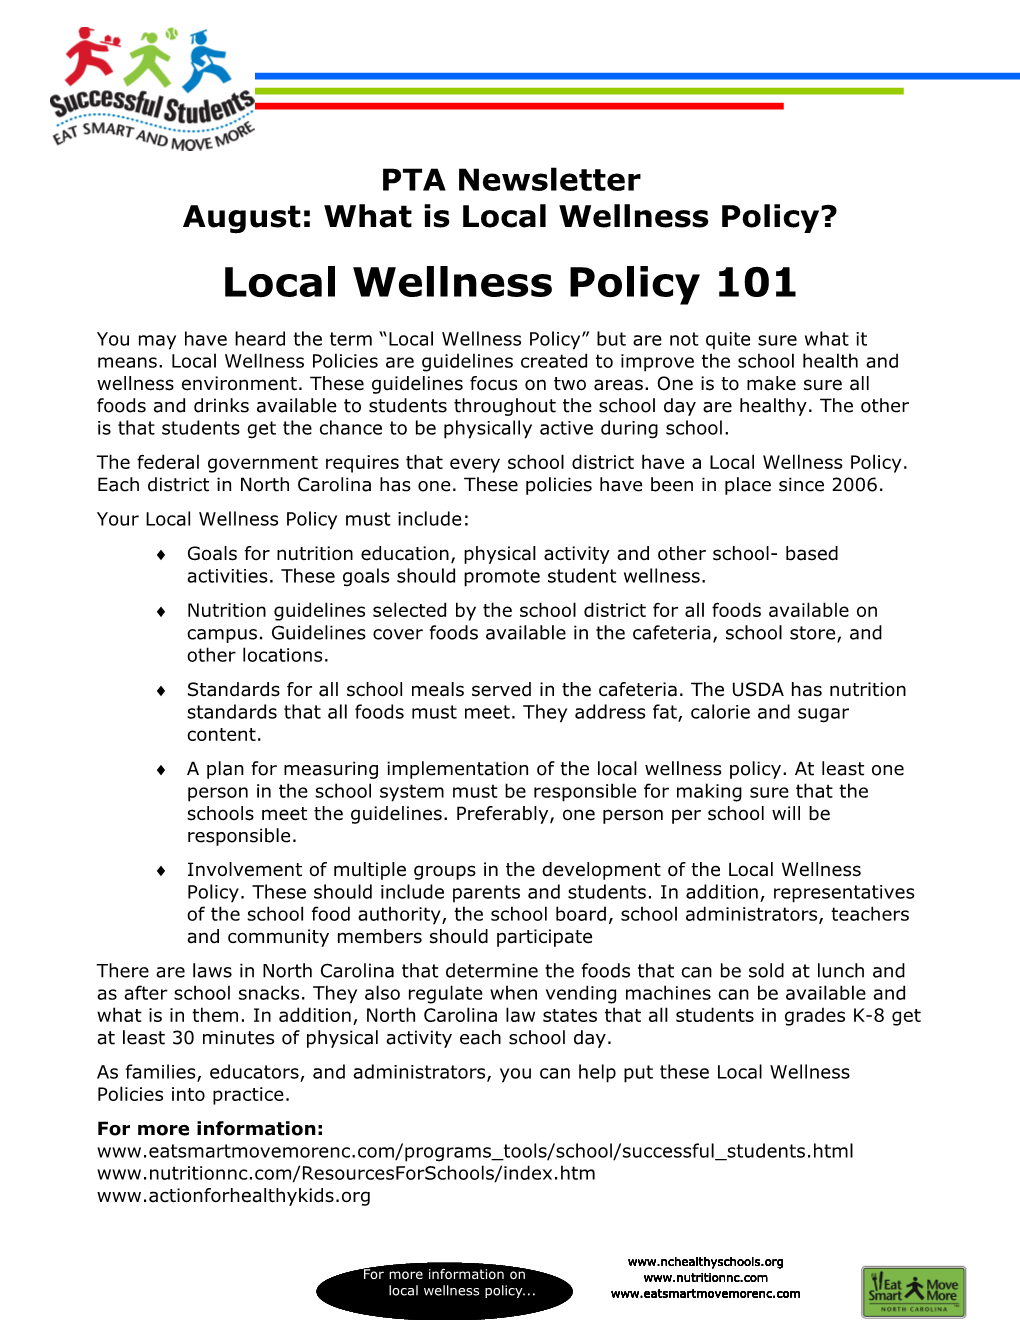 August: What Is Local Wellness Policy?